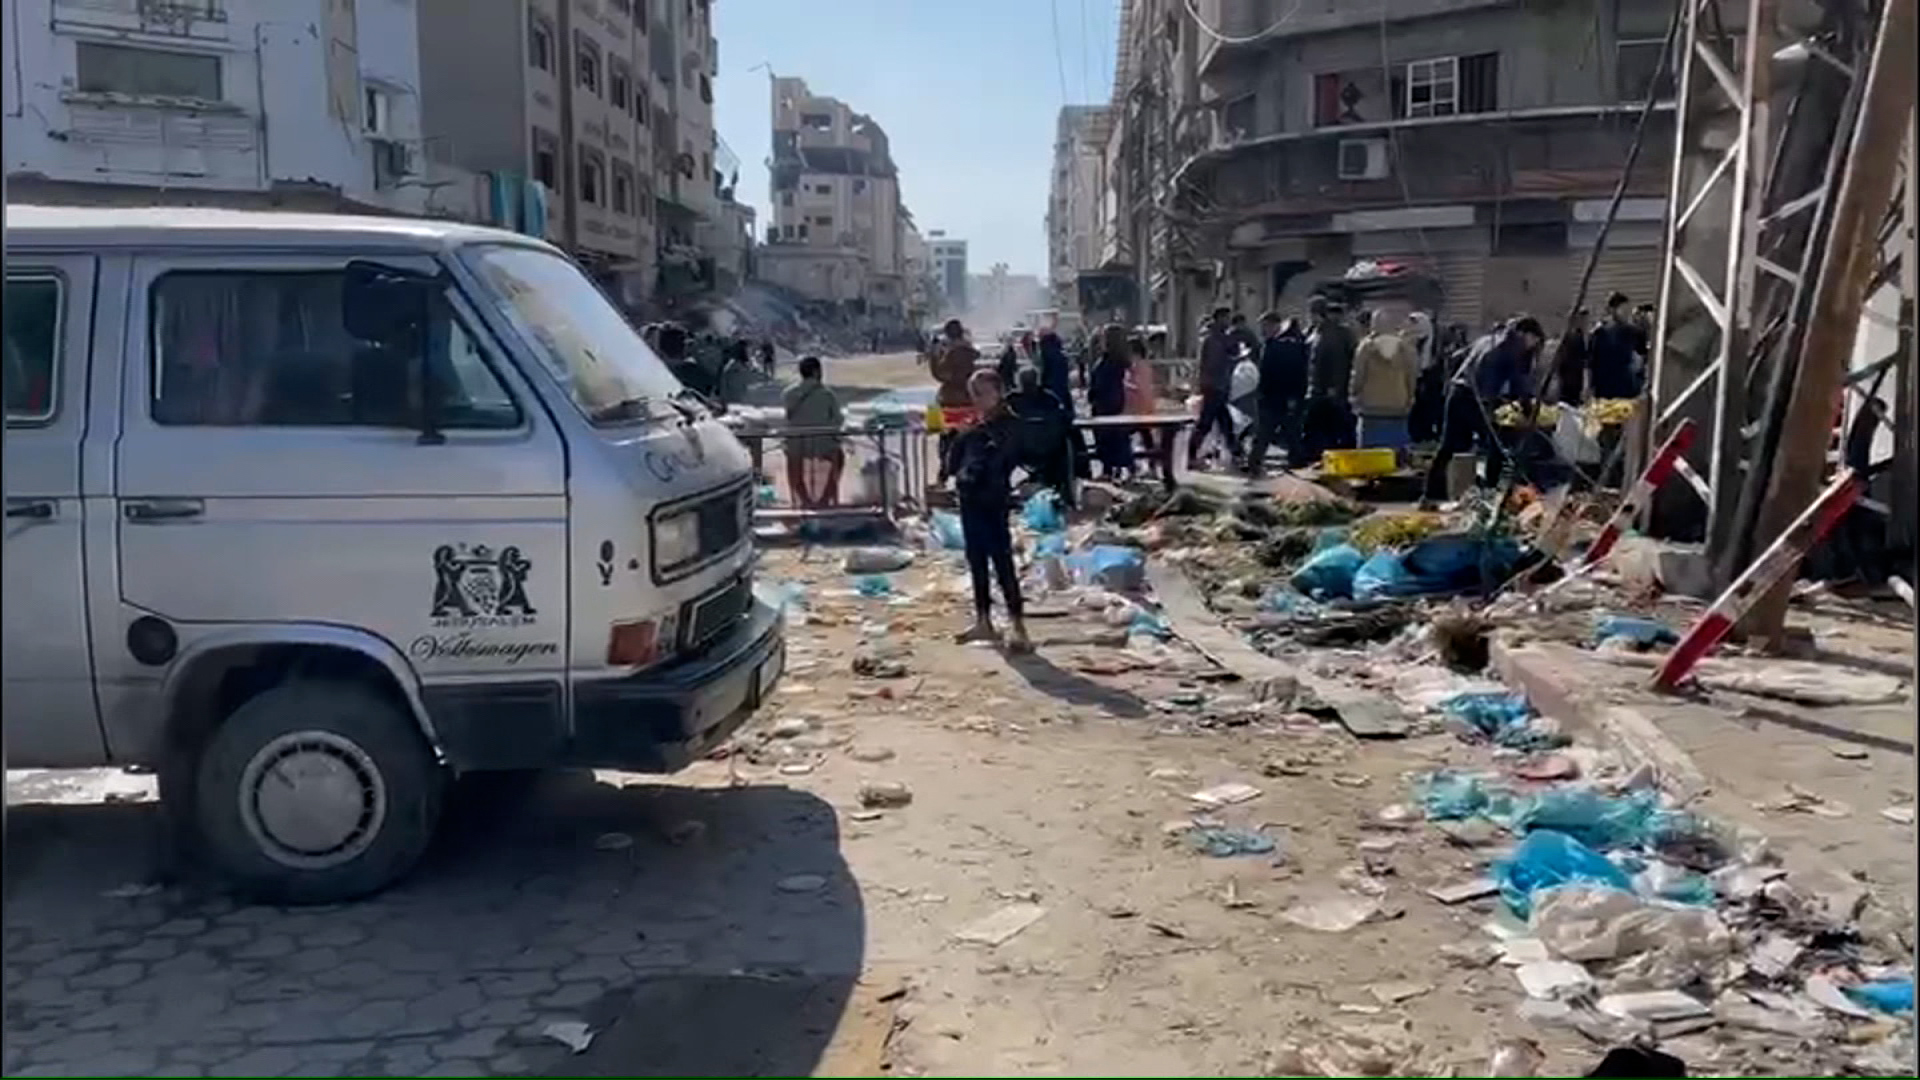 Screenshot from a video shot outside the Al Shifa Medical Complex in Gaza City on January 25.